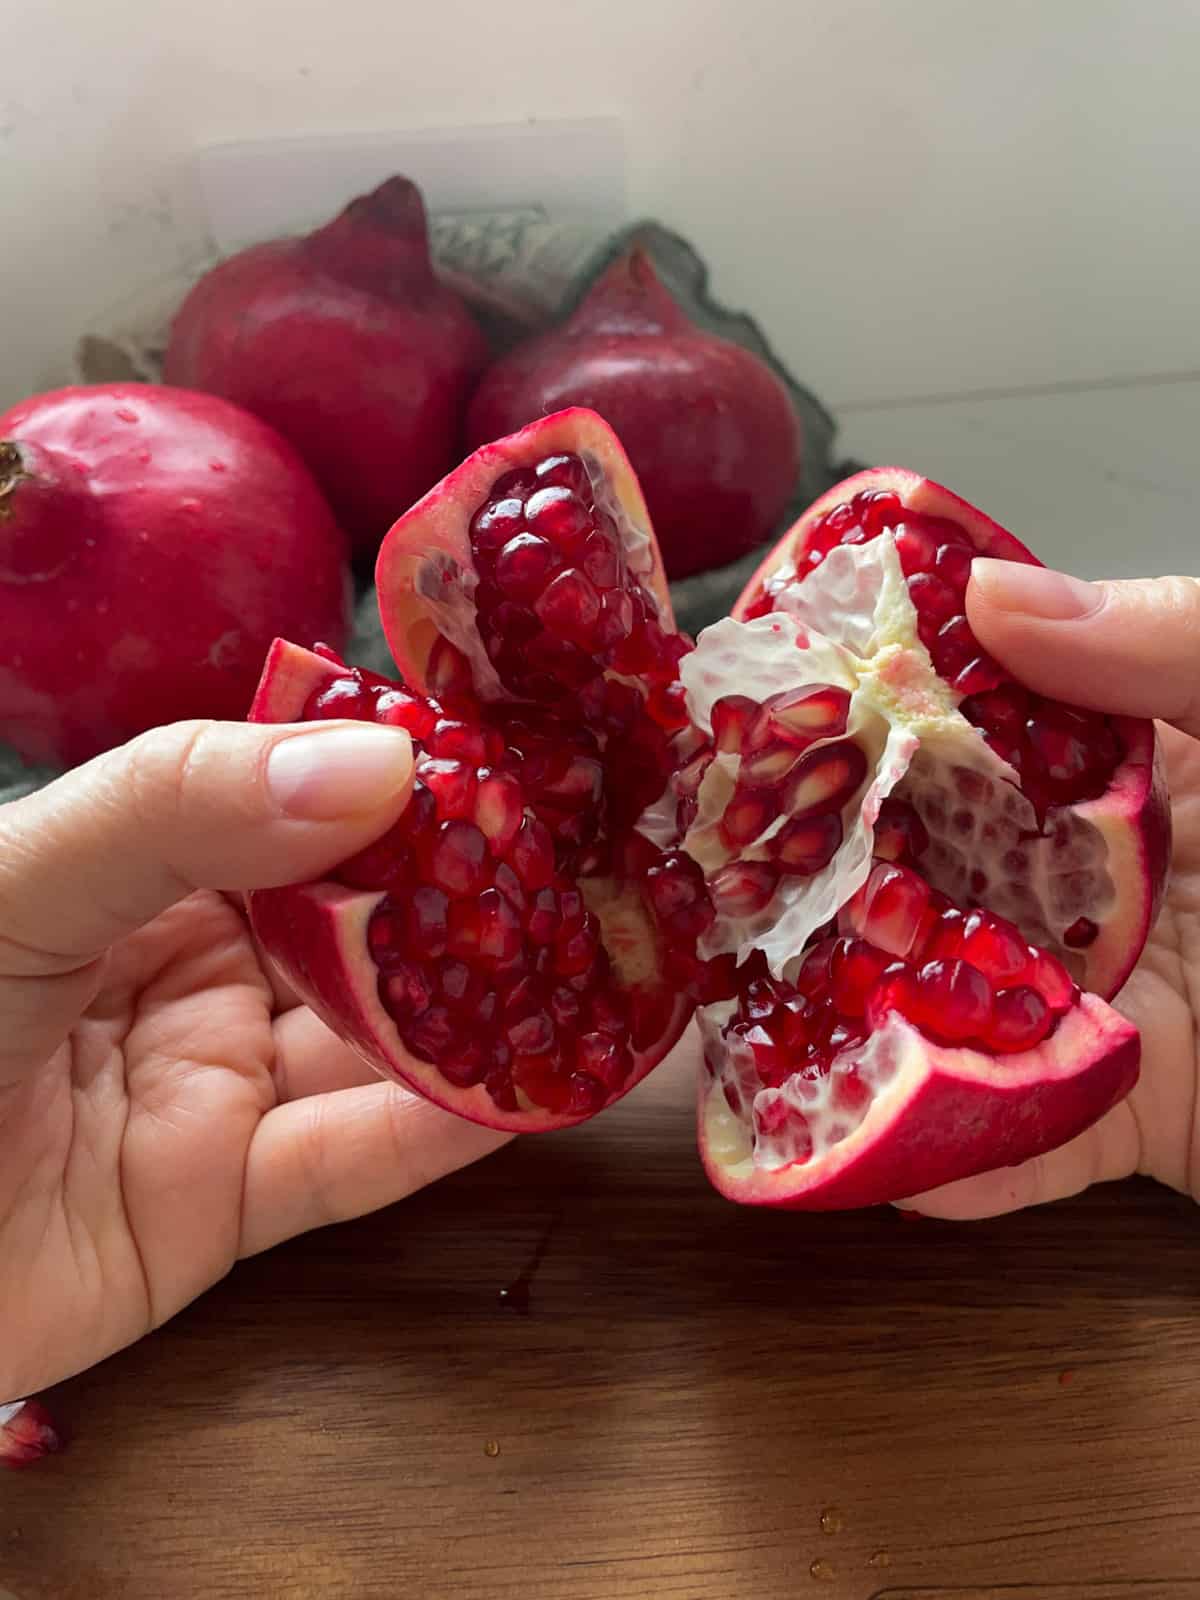 Pulling the segments of a pomegranate apart showing the arils inside.